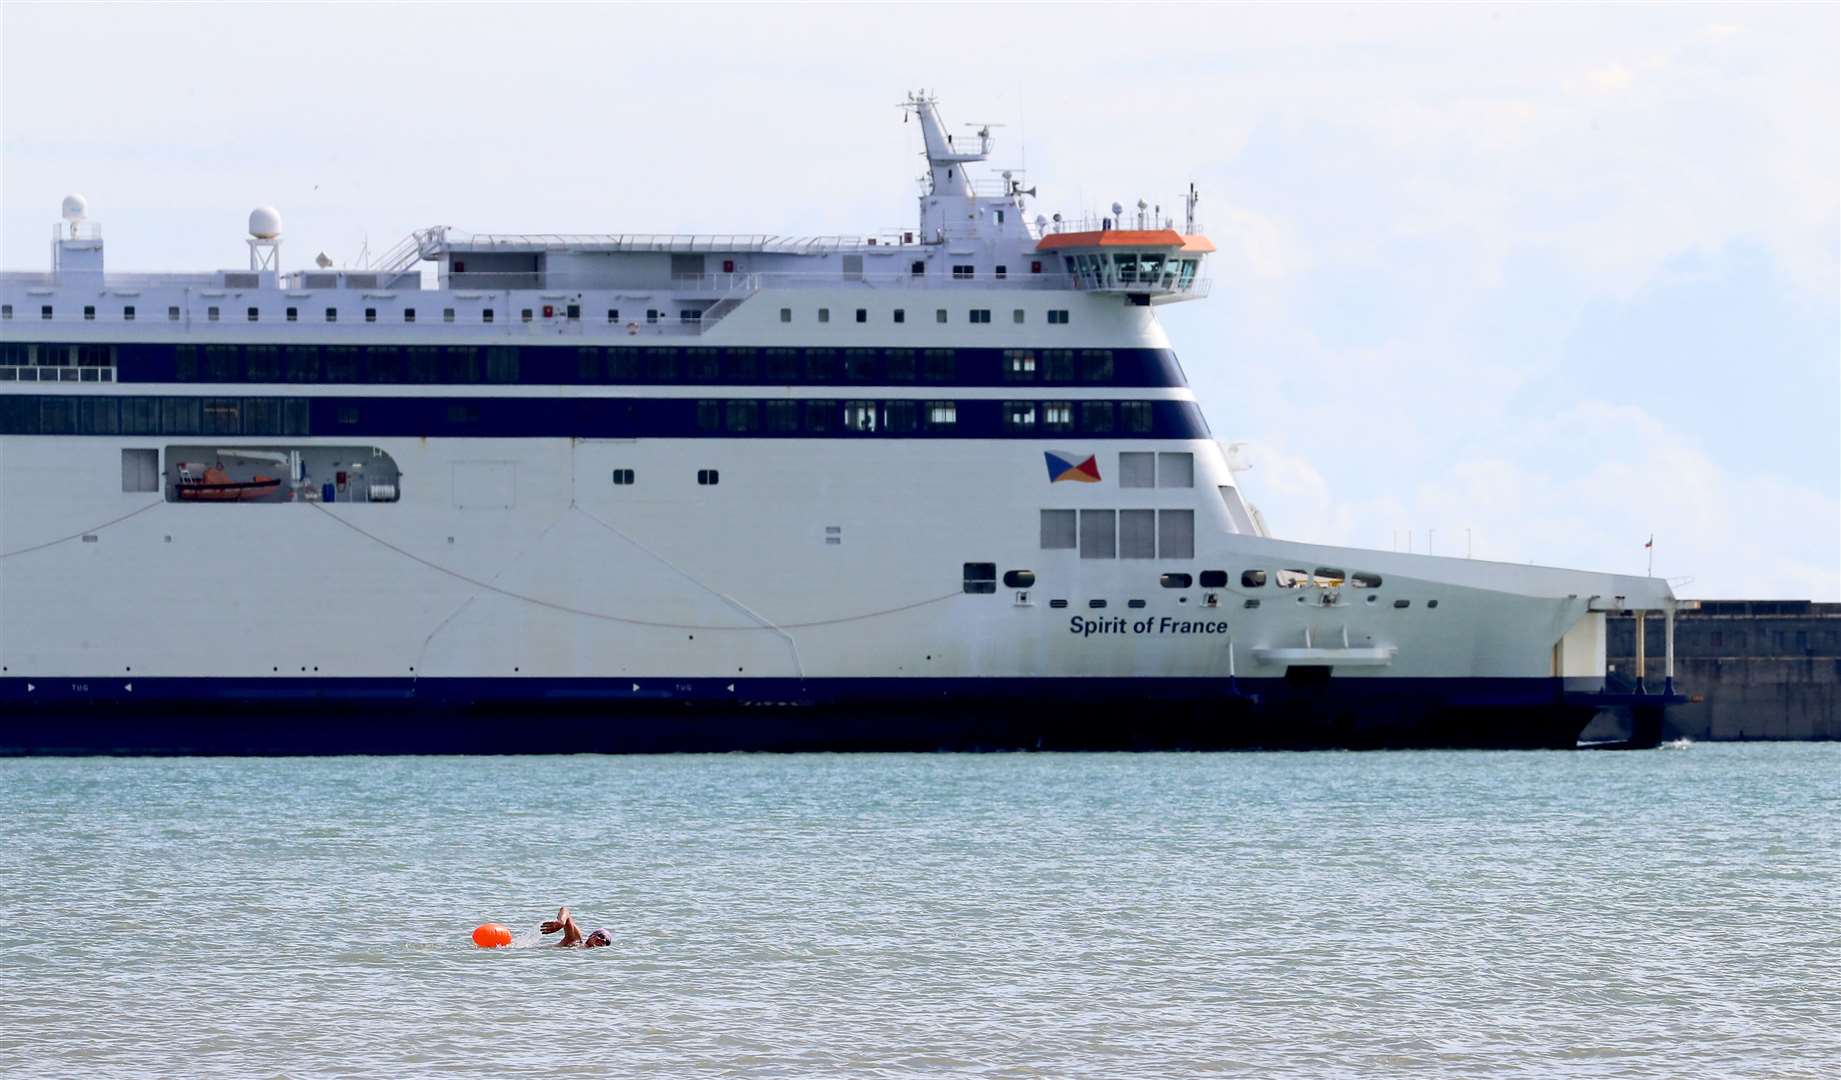 The RNLI has urged people to take care in water when Storm Francis arrives, as an open water swimmer passes the P&O Spirit of France ferry in the Port of Dover in Kent (Gareth Fuller/PA)